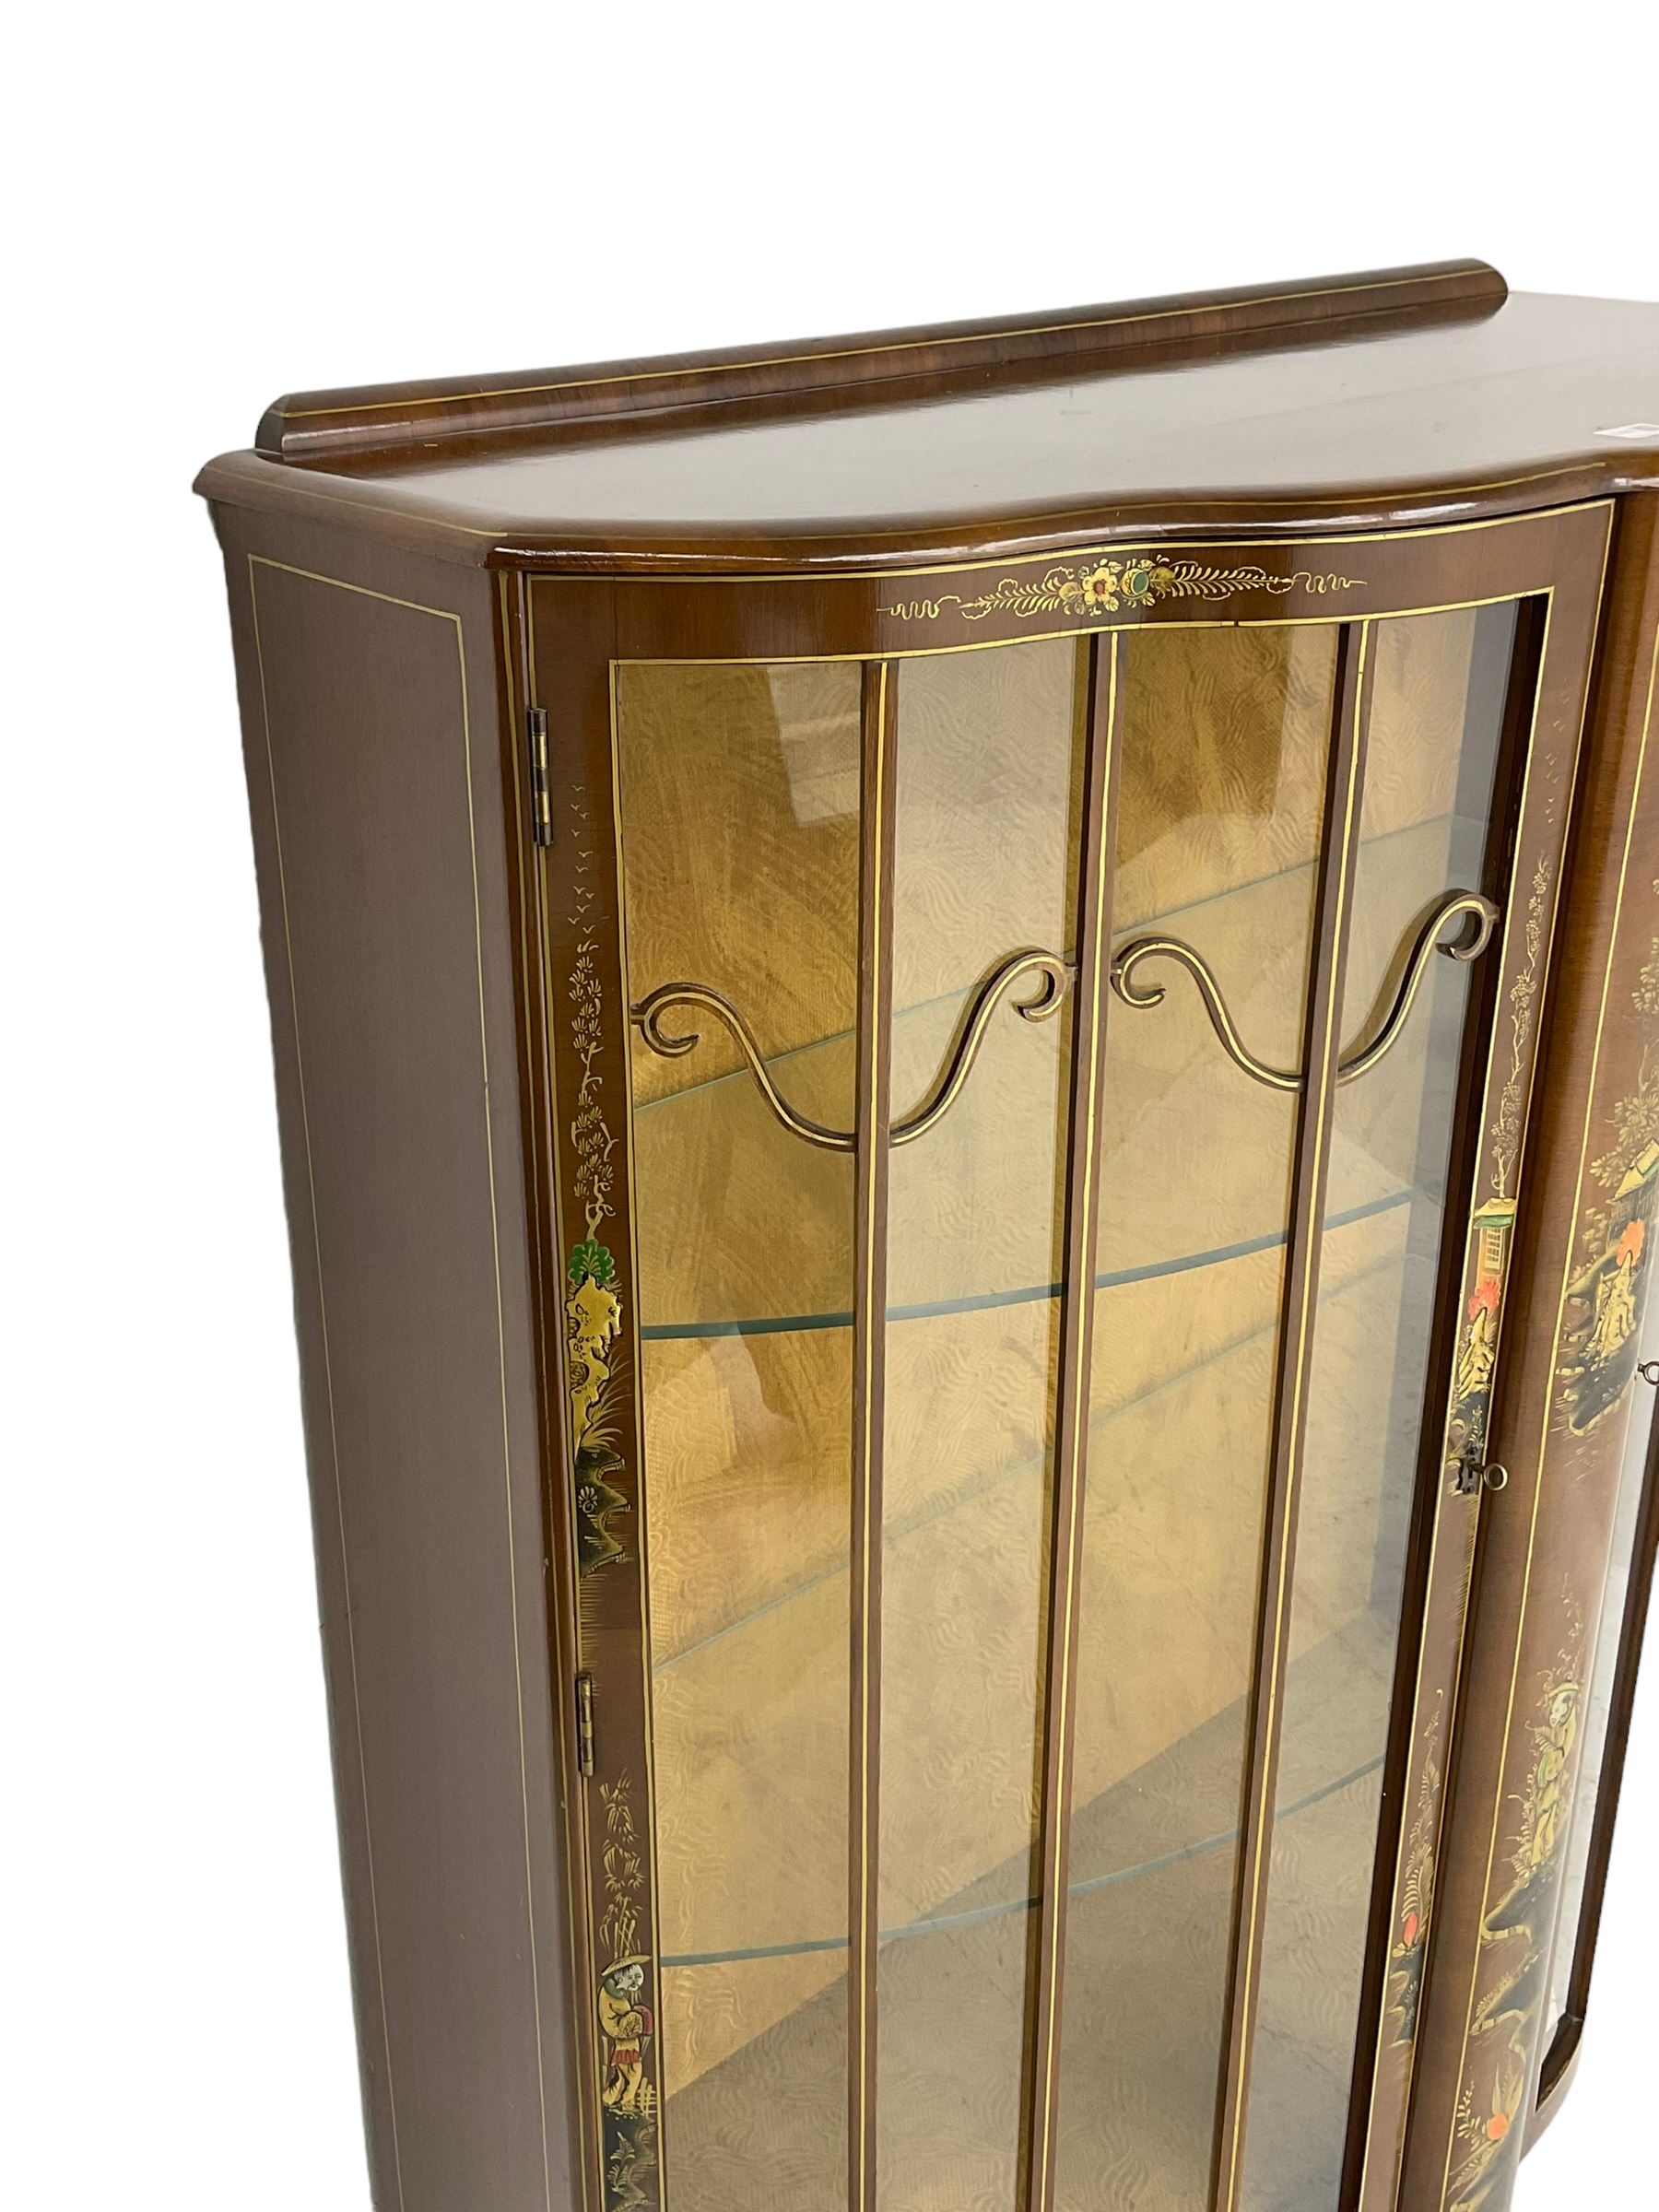 Early 20th century walnut display cabinet with Chinoiserie decoration - Image 4 of 7